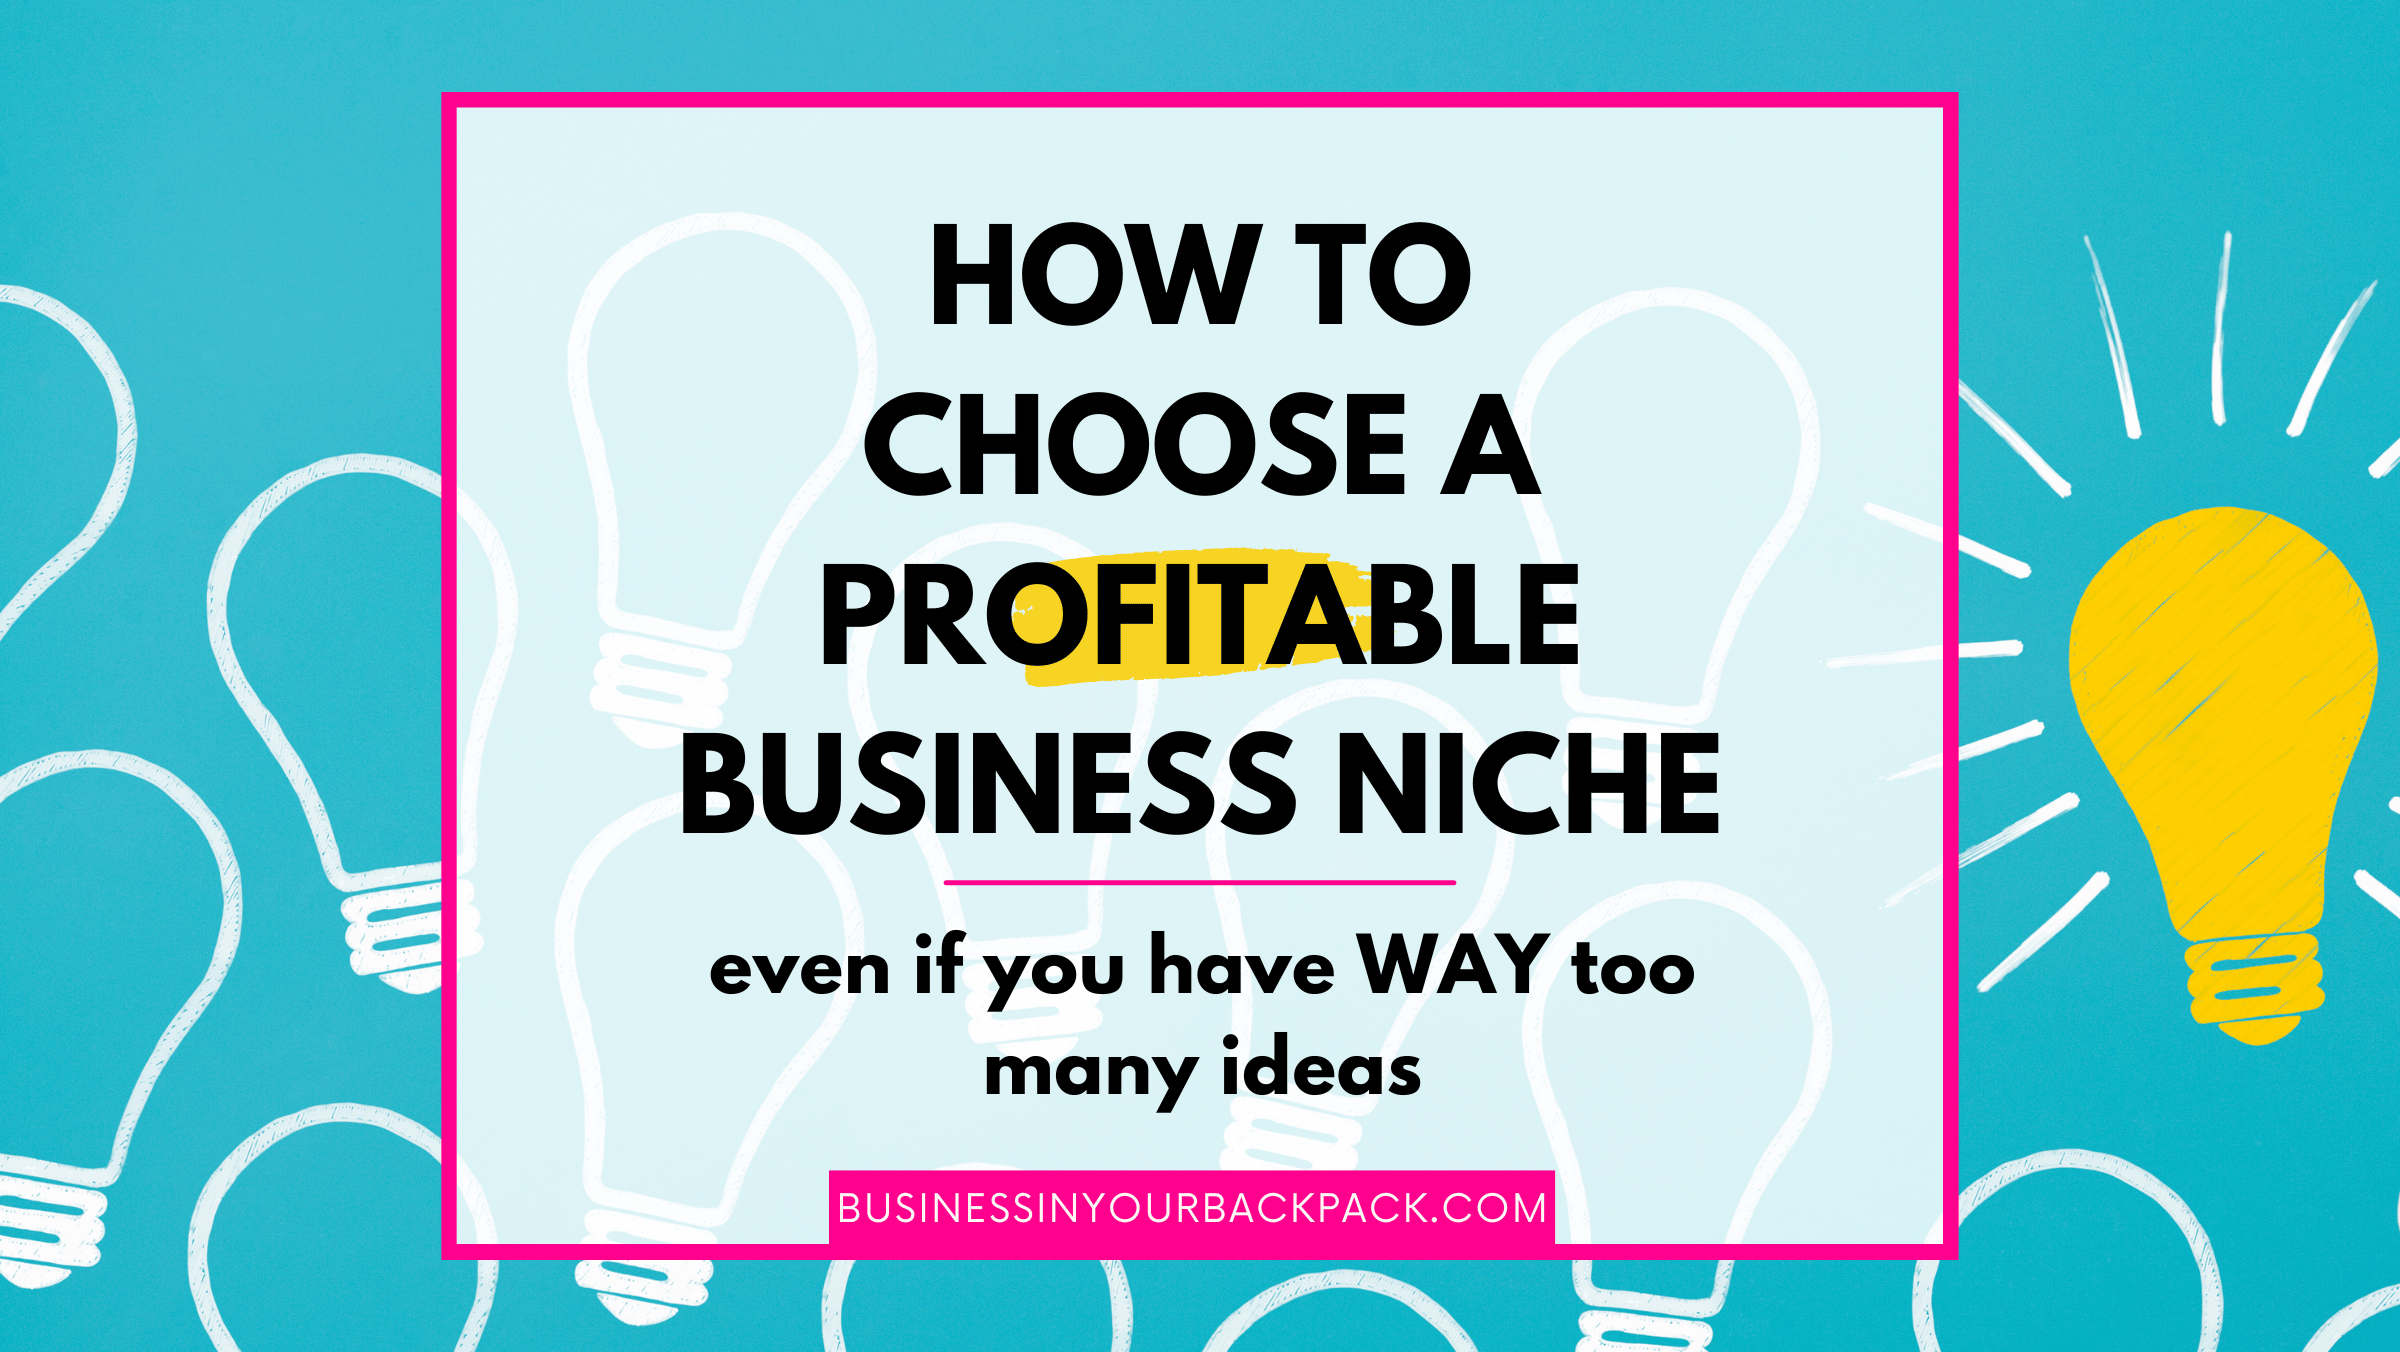 How to choose a profitable business niche even if you have way too many ideas FI Business in your Backpack